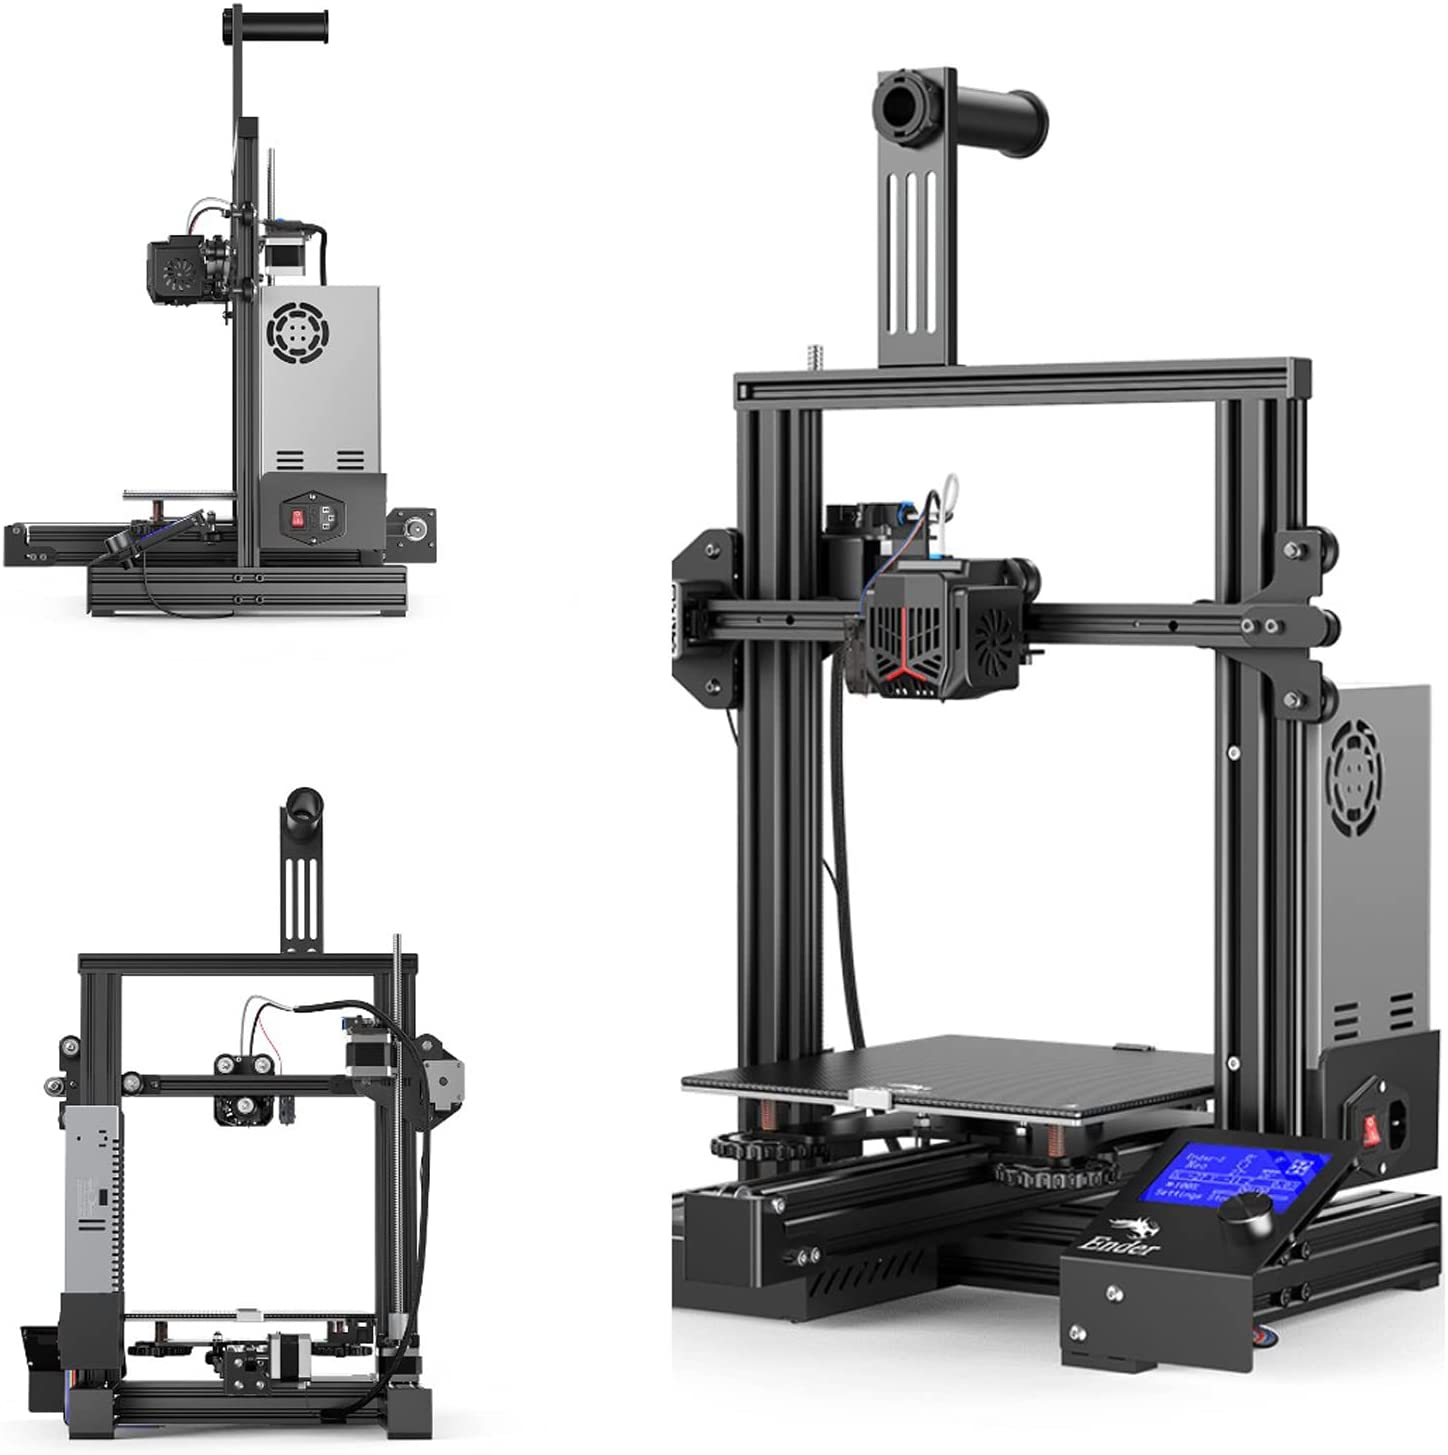 Creality Ender-3 Neo 3D Printer - Second Hand